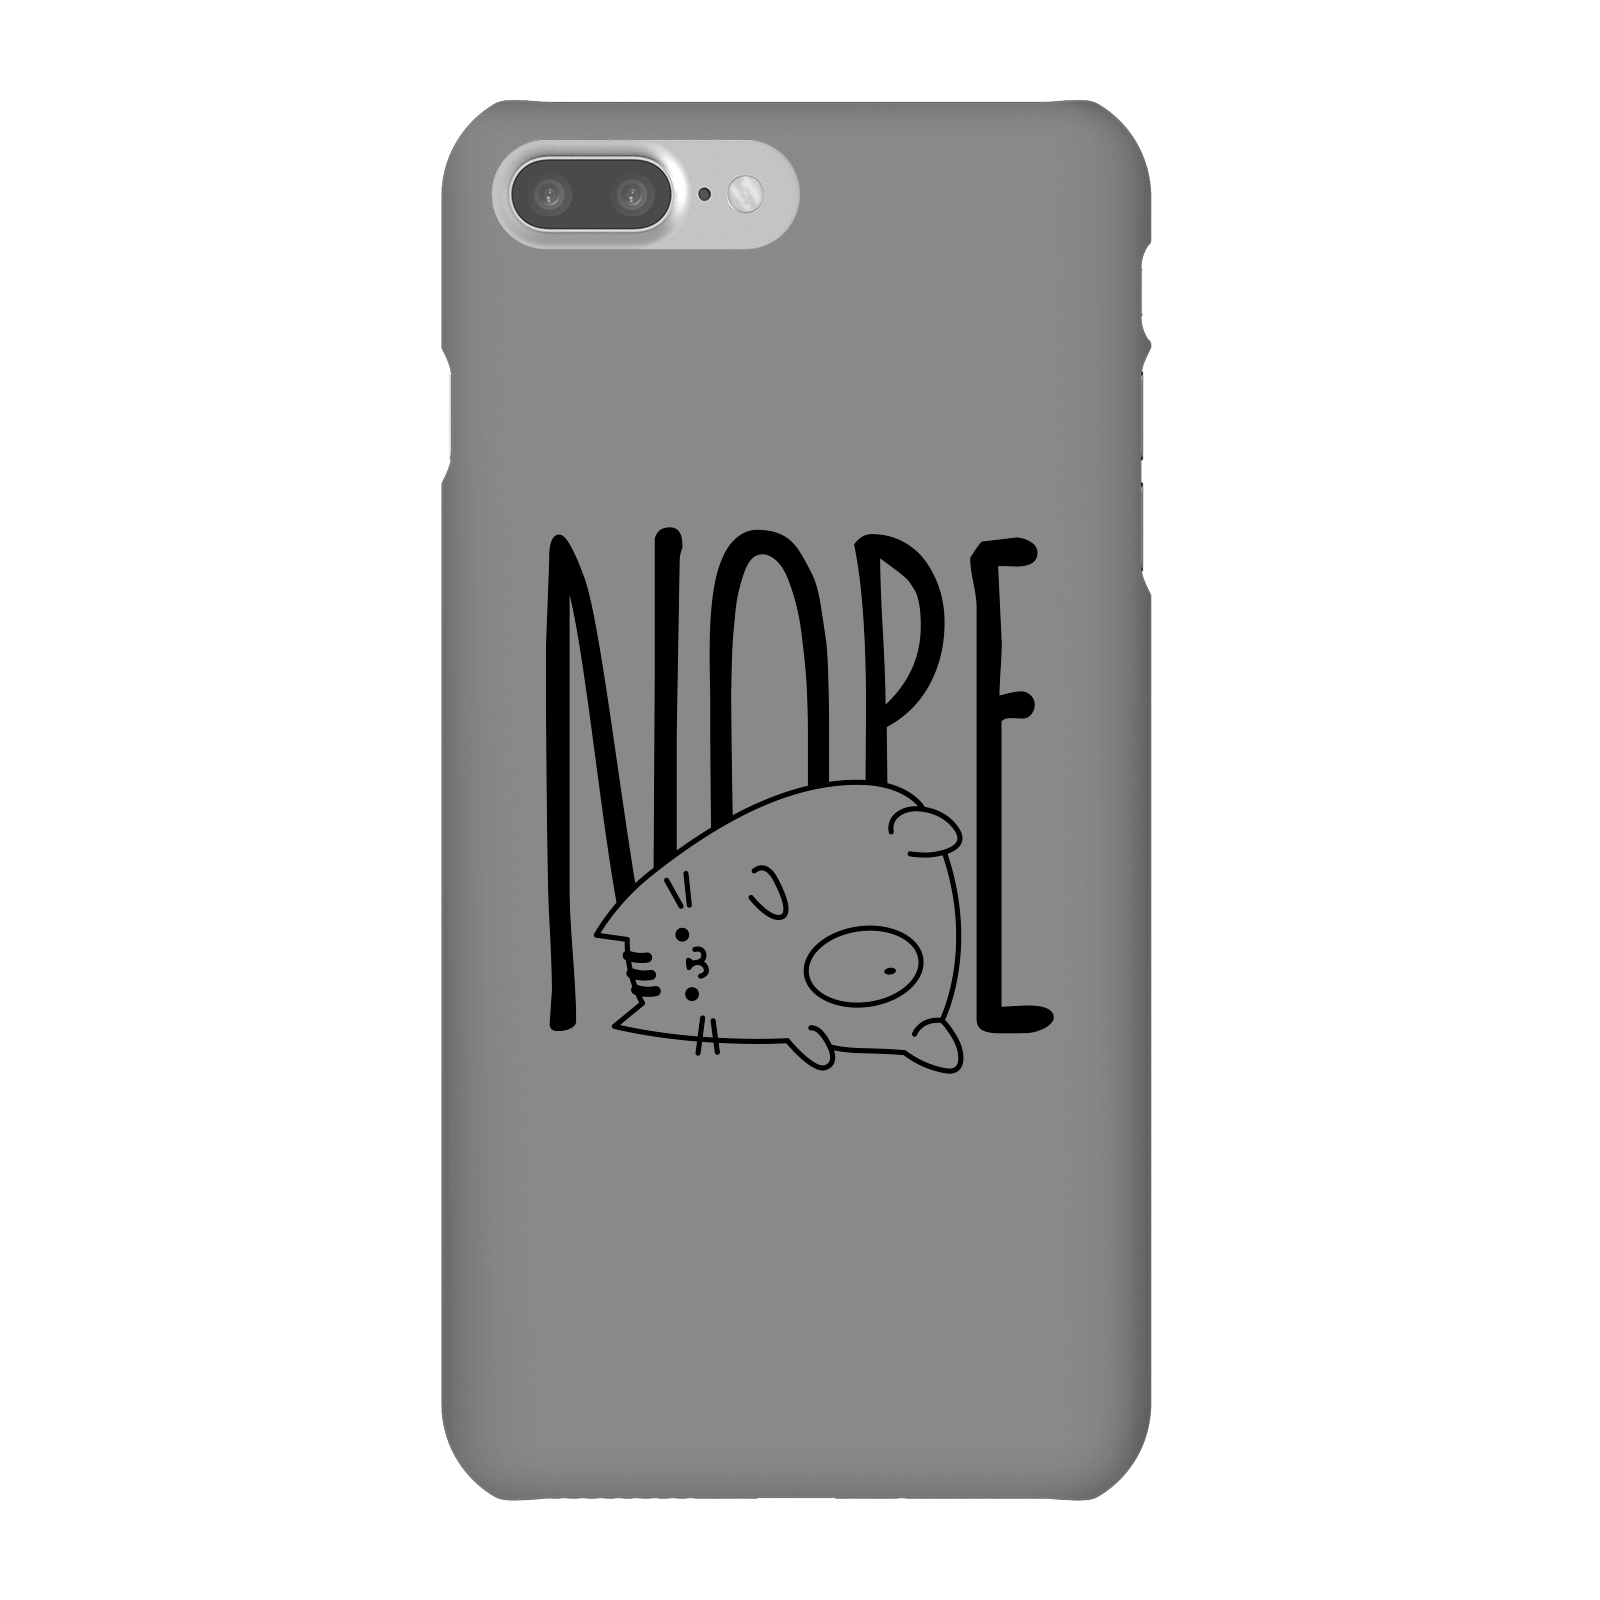 Nope Phone Case for iPhone and Android - iPhone 7 Plus - Snap Case - Matte